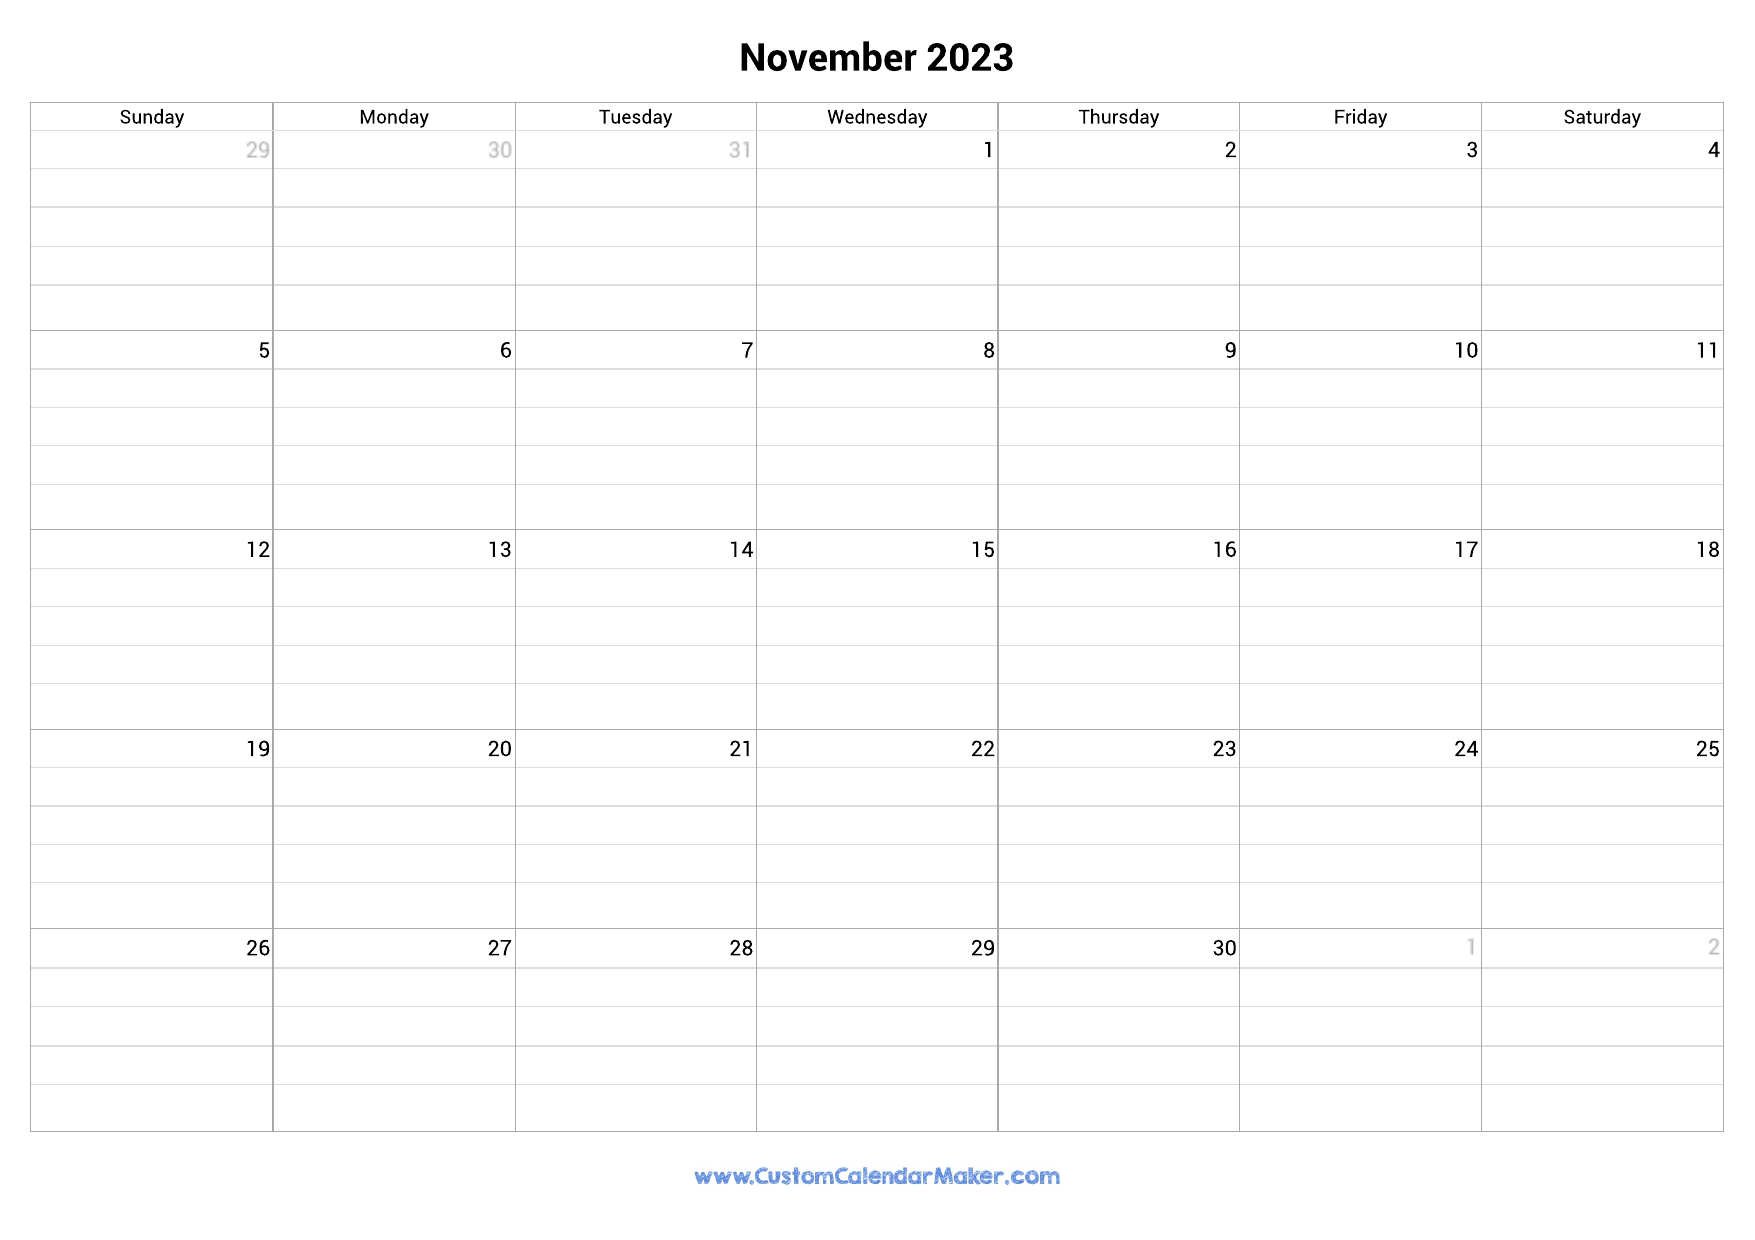 november-2023-fillable-calendar-grid-with-lines